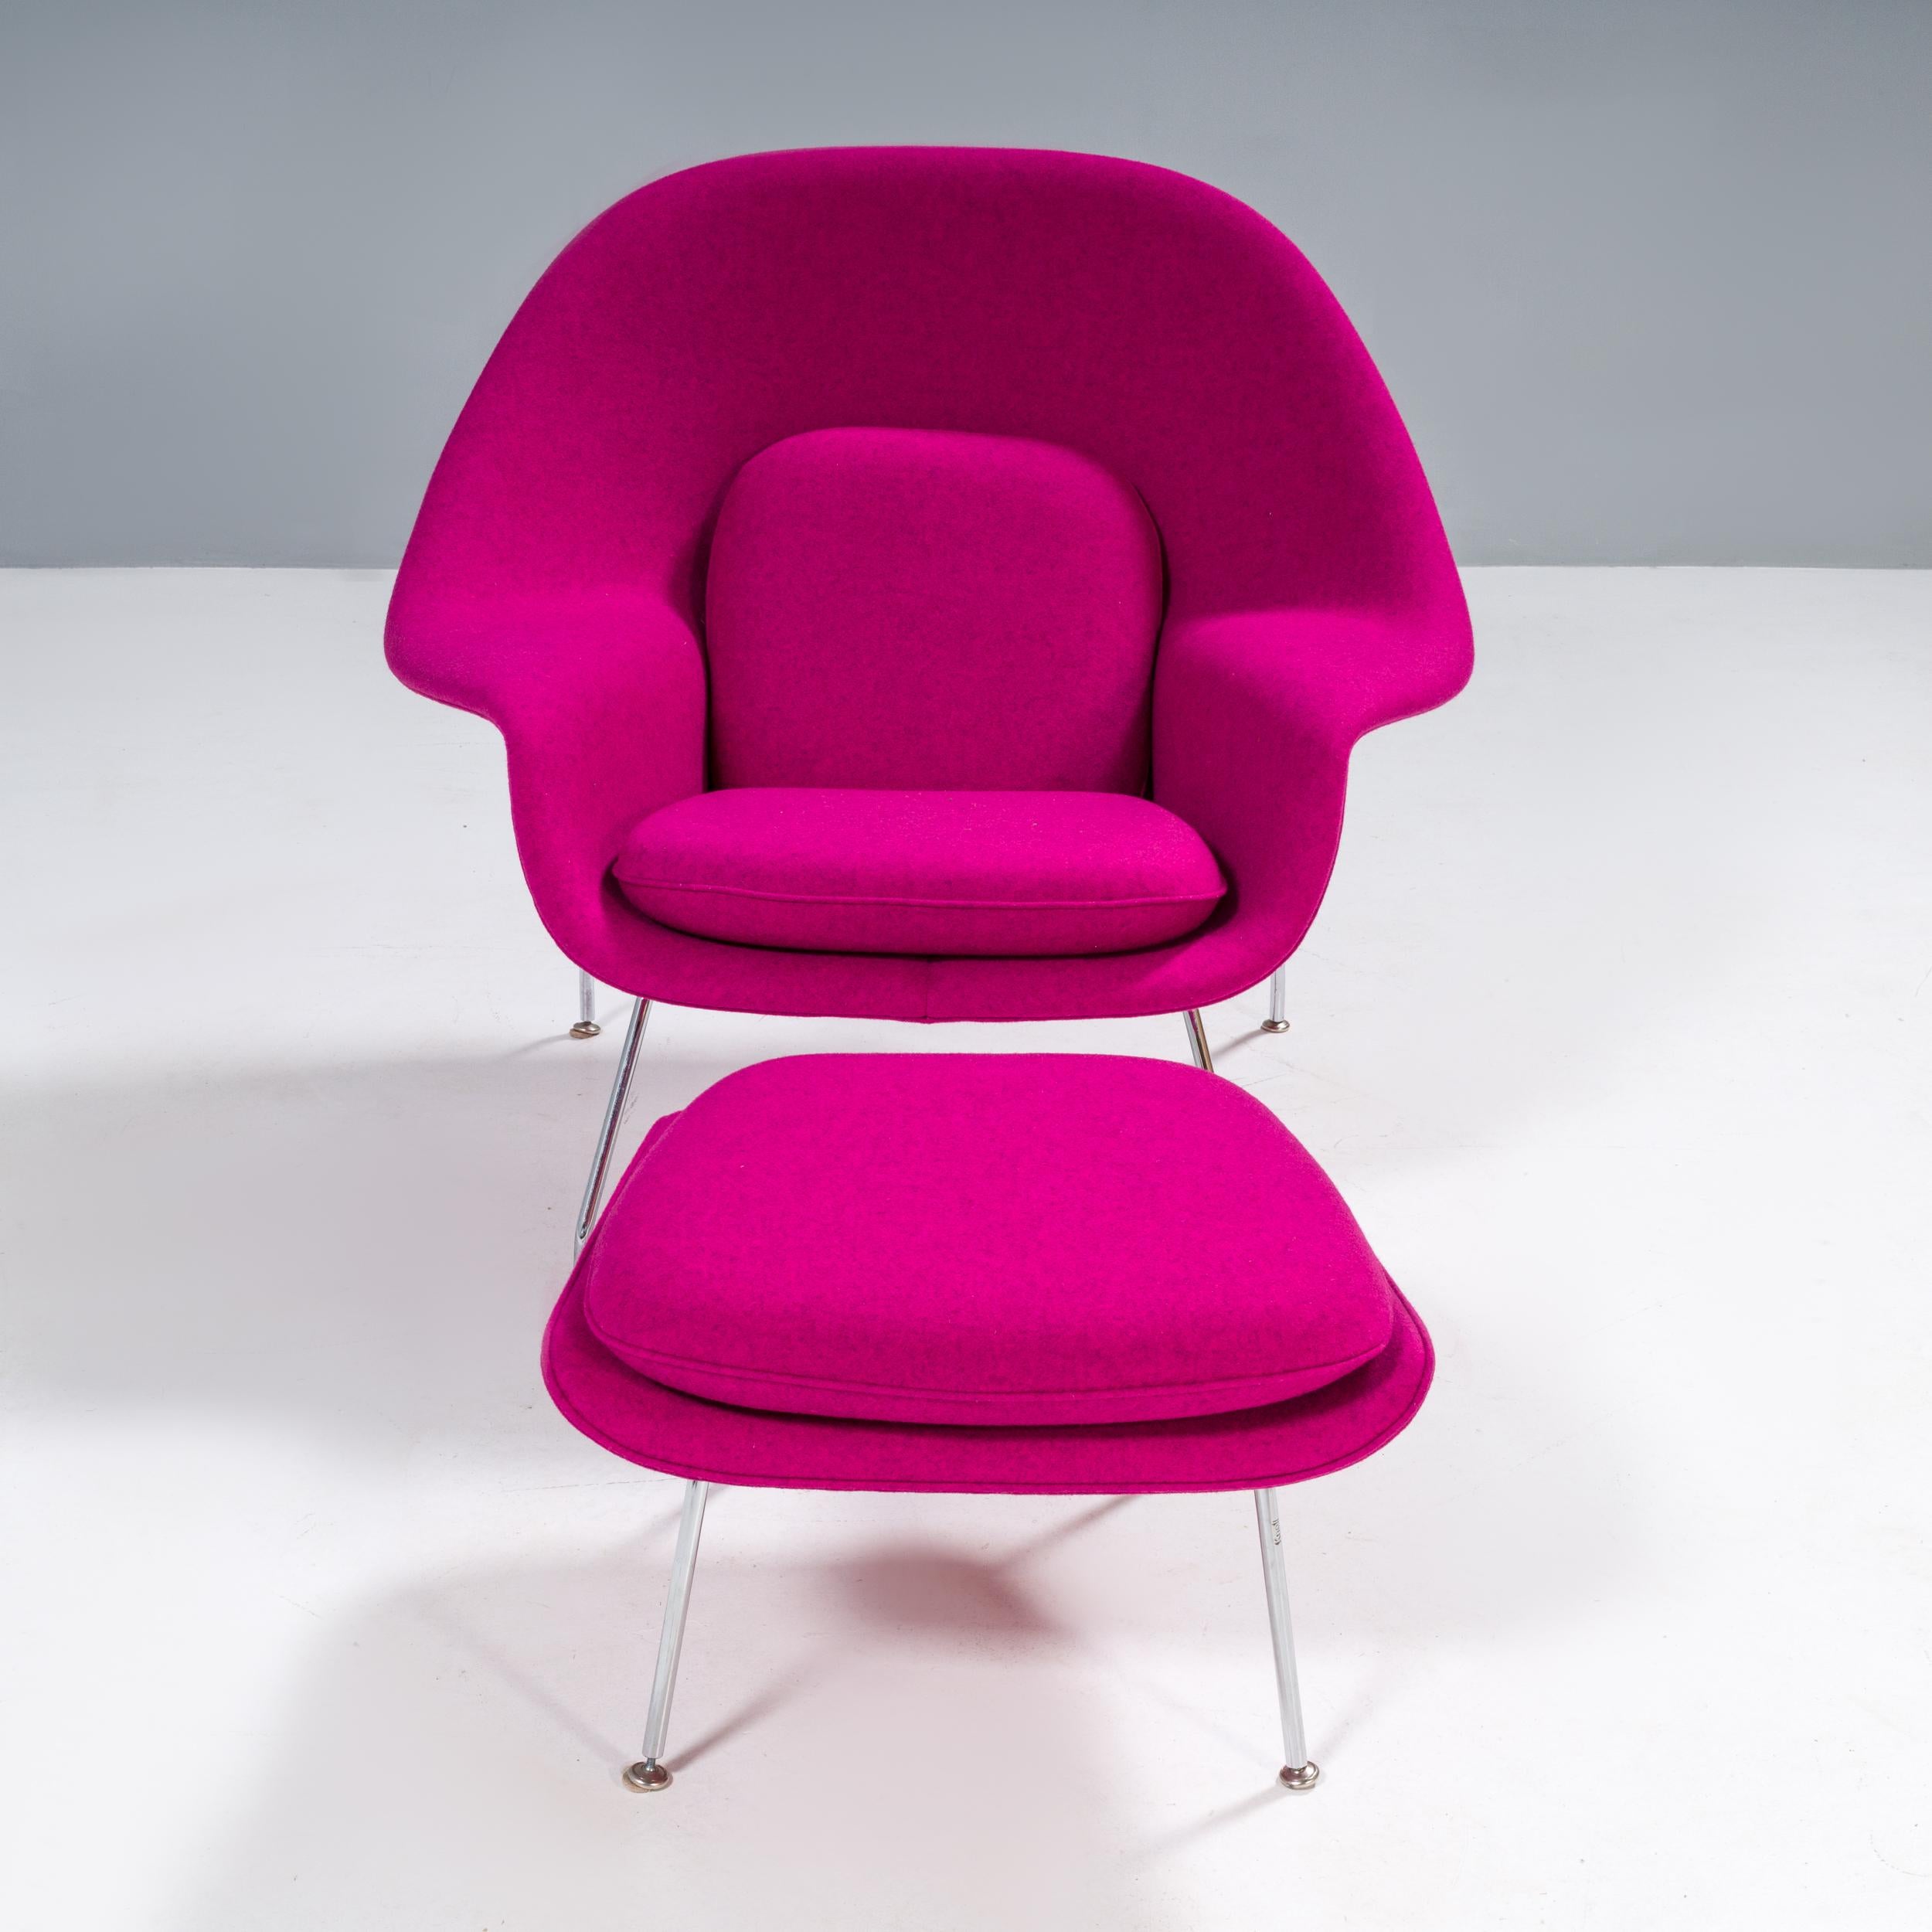 This iconic chair was designed by prolific designer Eero Saarinen in 1948. 
Eero Saarinen designed the groundbreaking womb chair at Florence Knoll's request for “a chair that was like a basket full of pillows - something she could really curl up